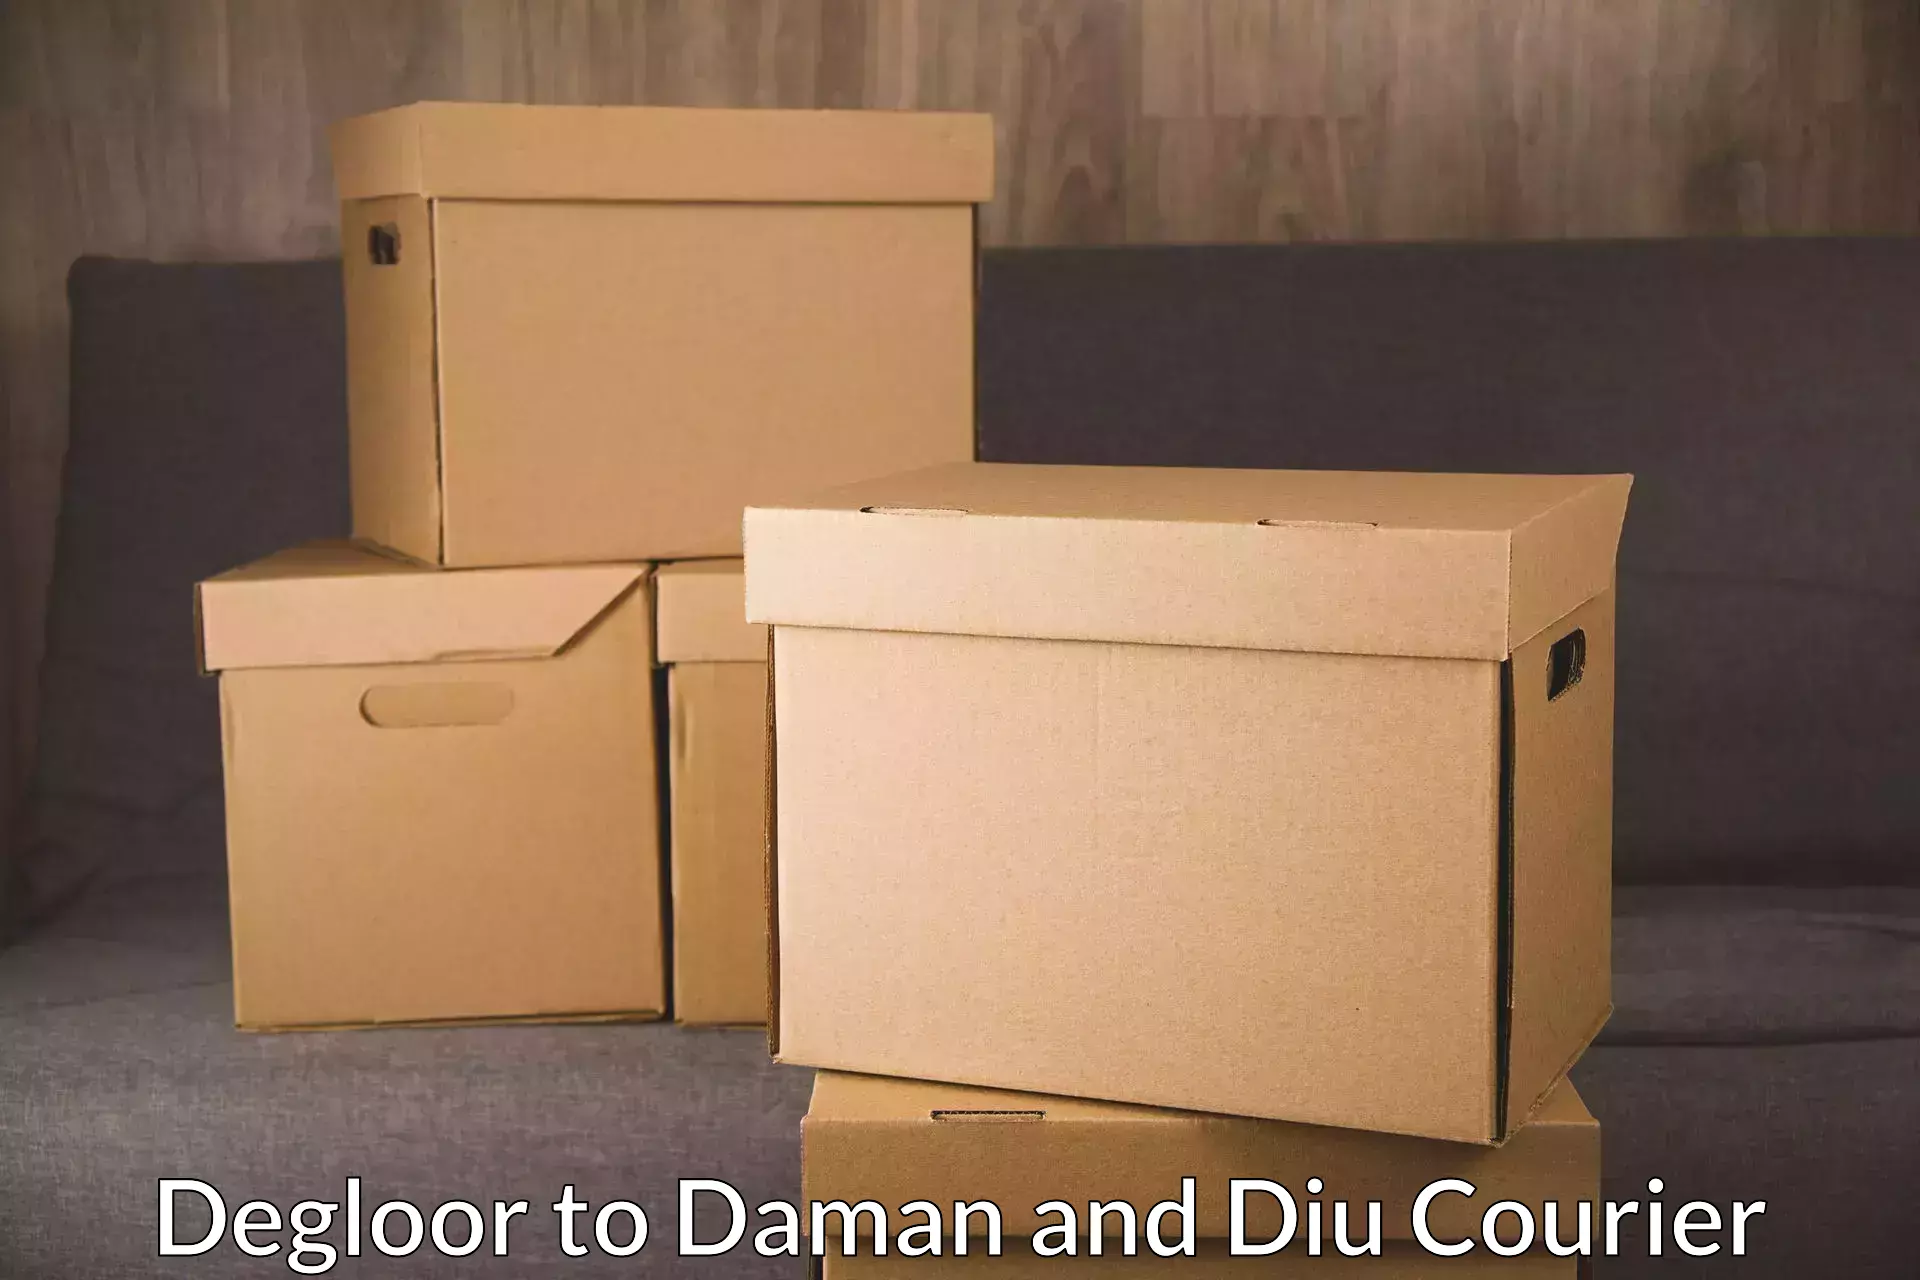 Rural area delivery Degloor to Daman and Diu